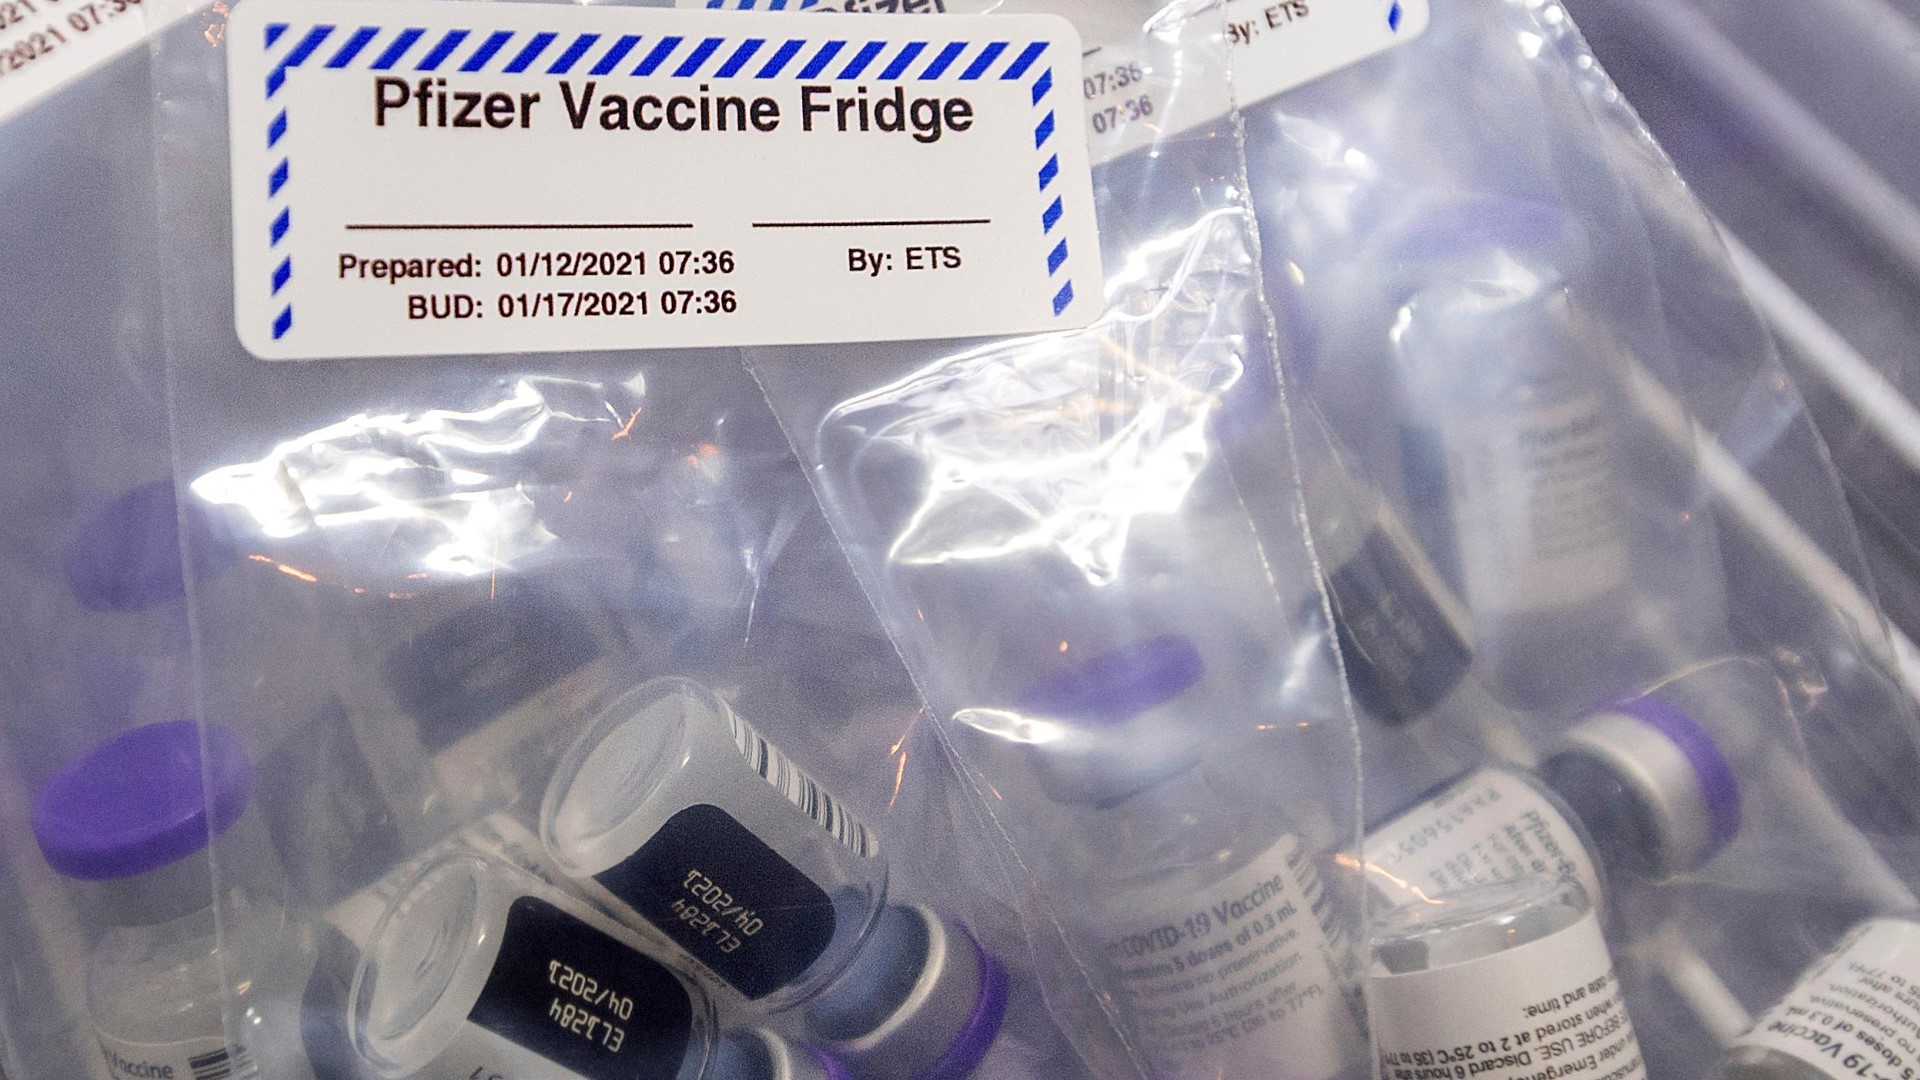 While the state will see more COVID vaccines coming, they are still testing the Moderna vaccine batch that caused several reactions.